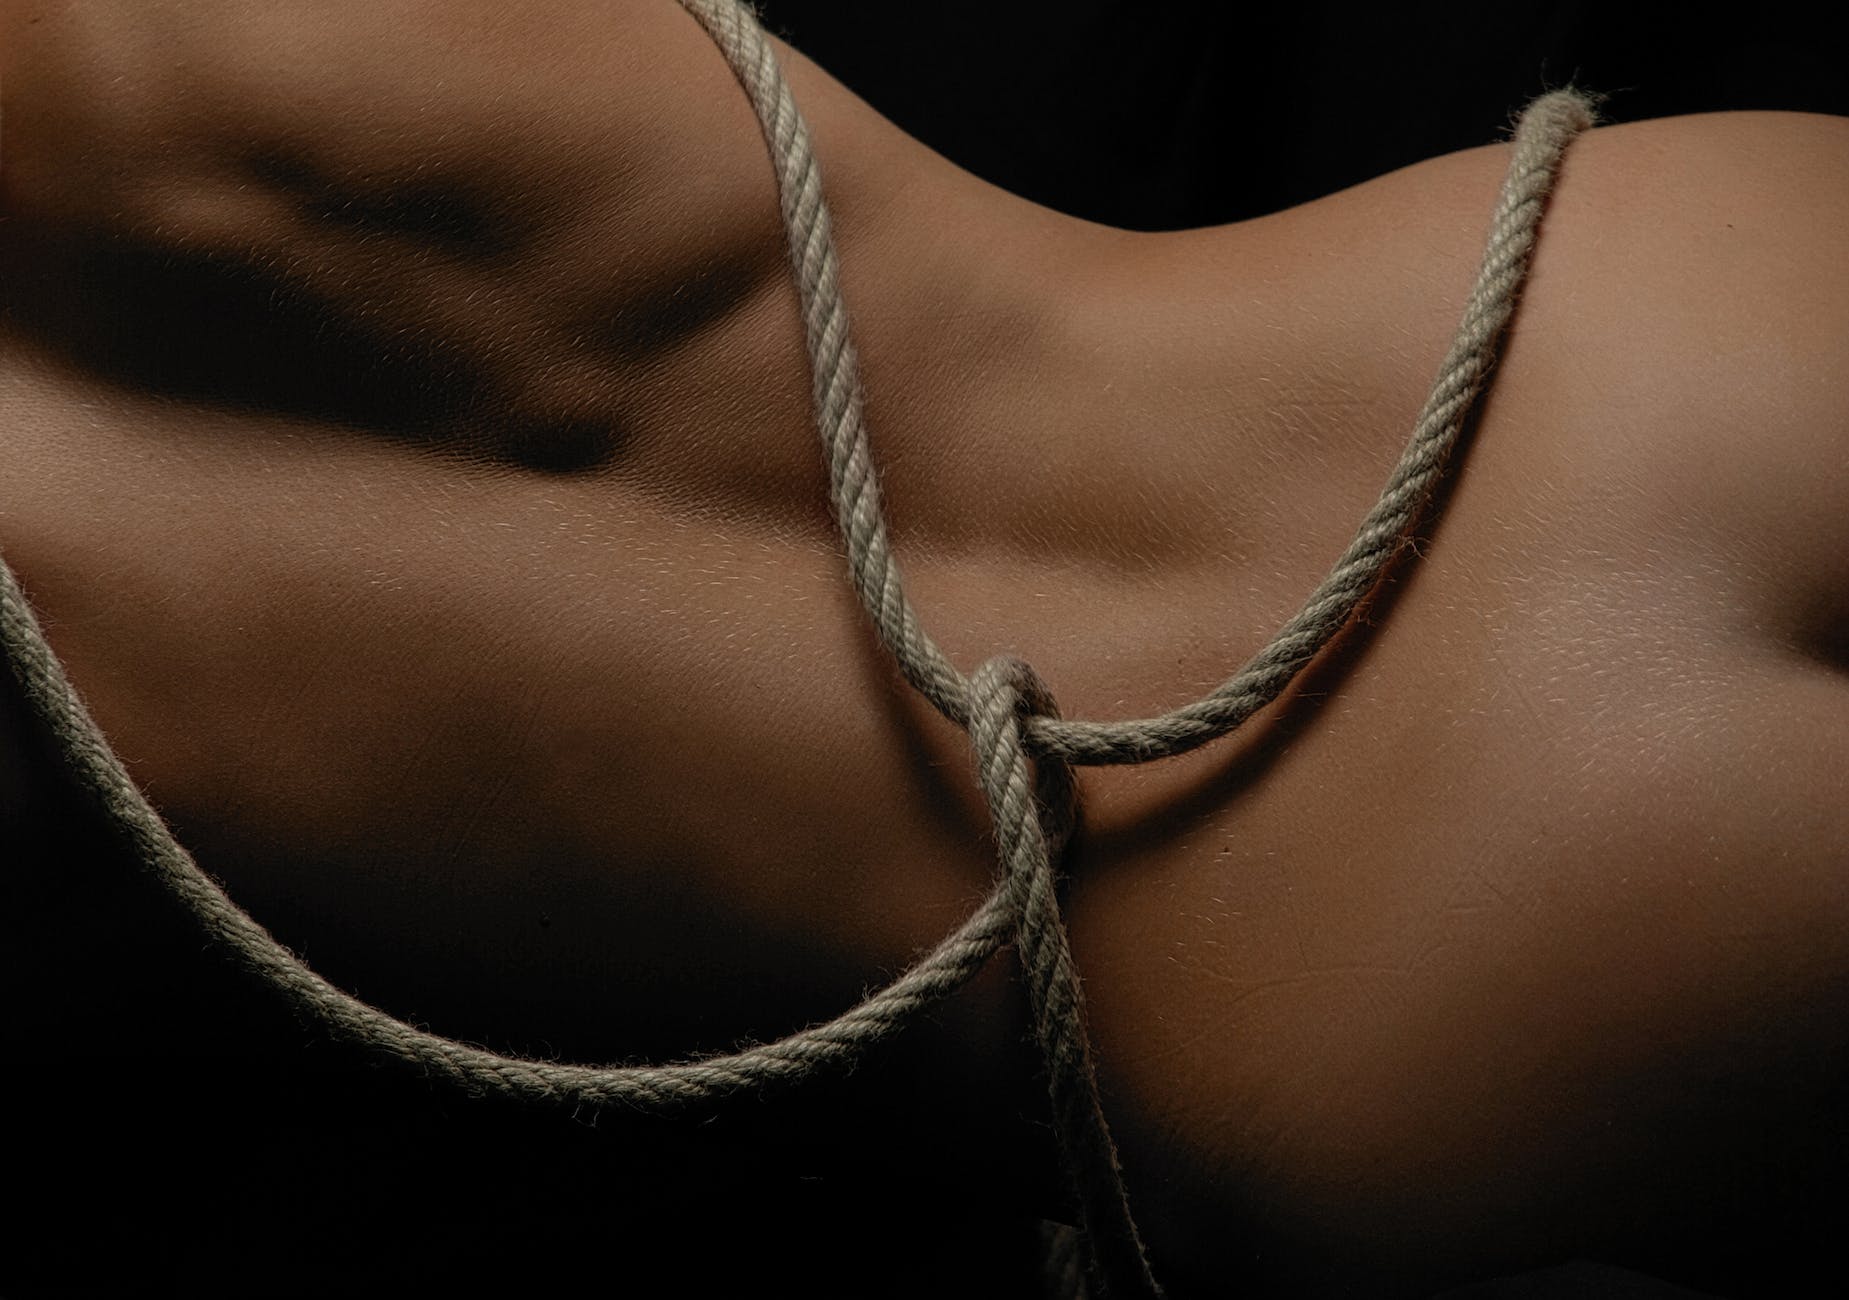 a nude person with rope tied around its body